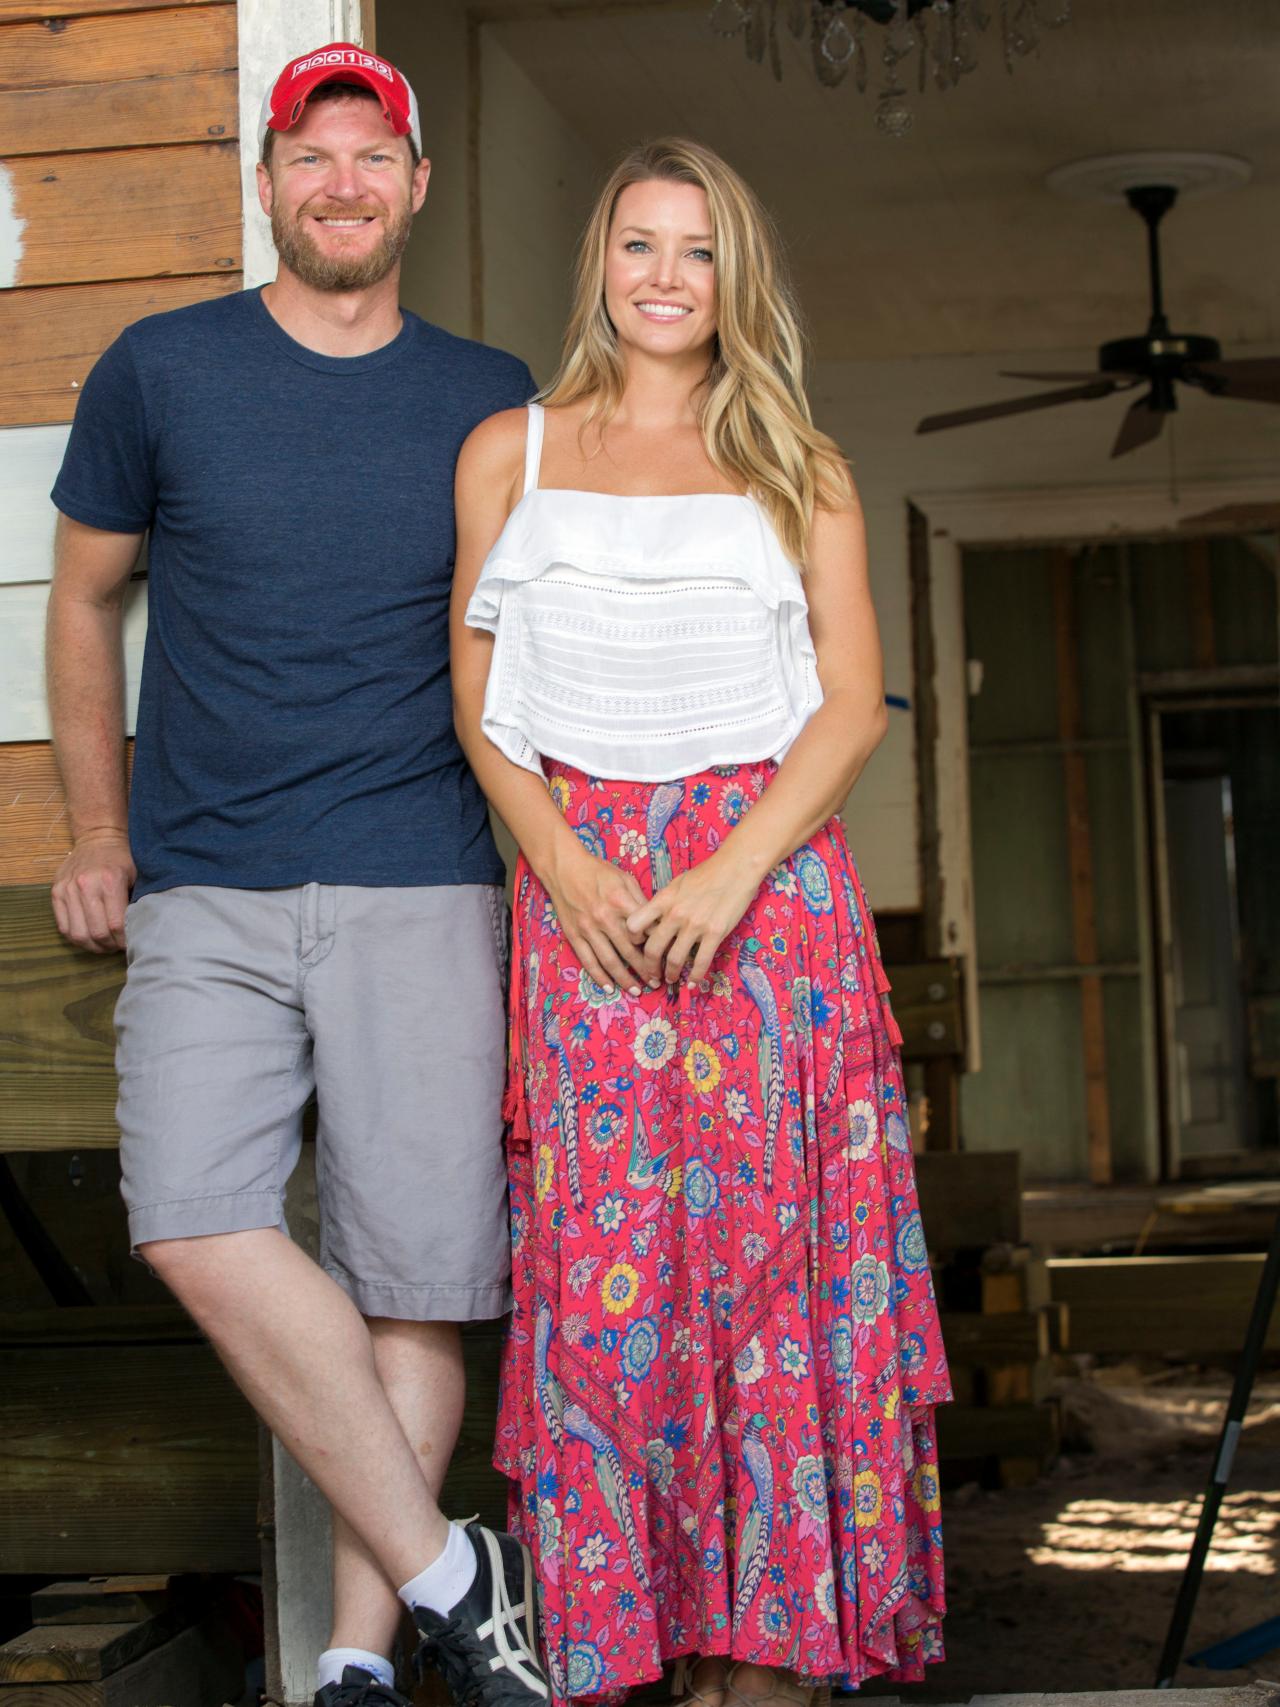 a new series starring dale earnhardt jr. and wife amy is coming to